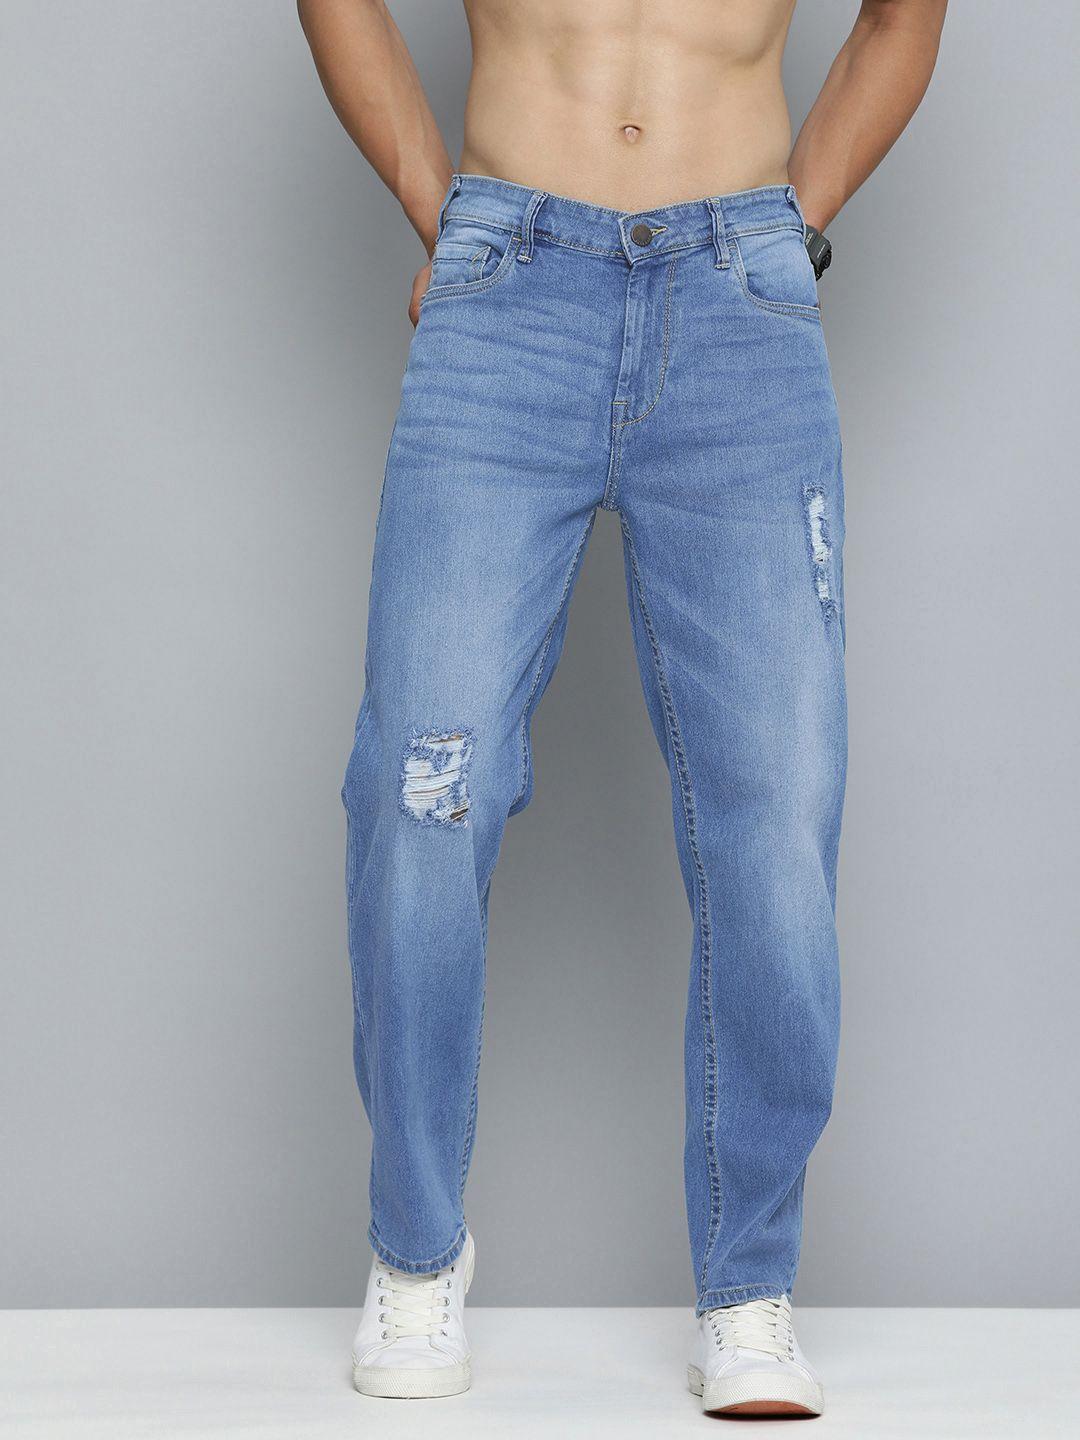 here&now men mildly distressed heavy fade stretchable mid-rise jeans